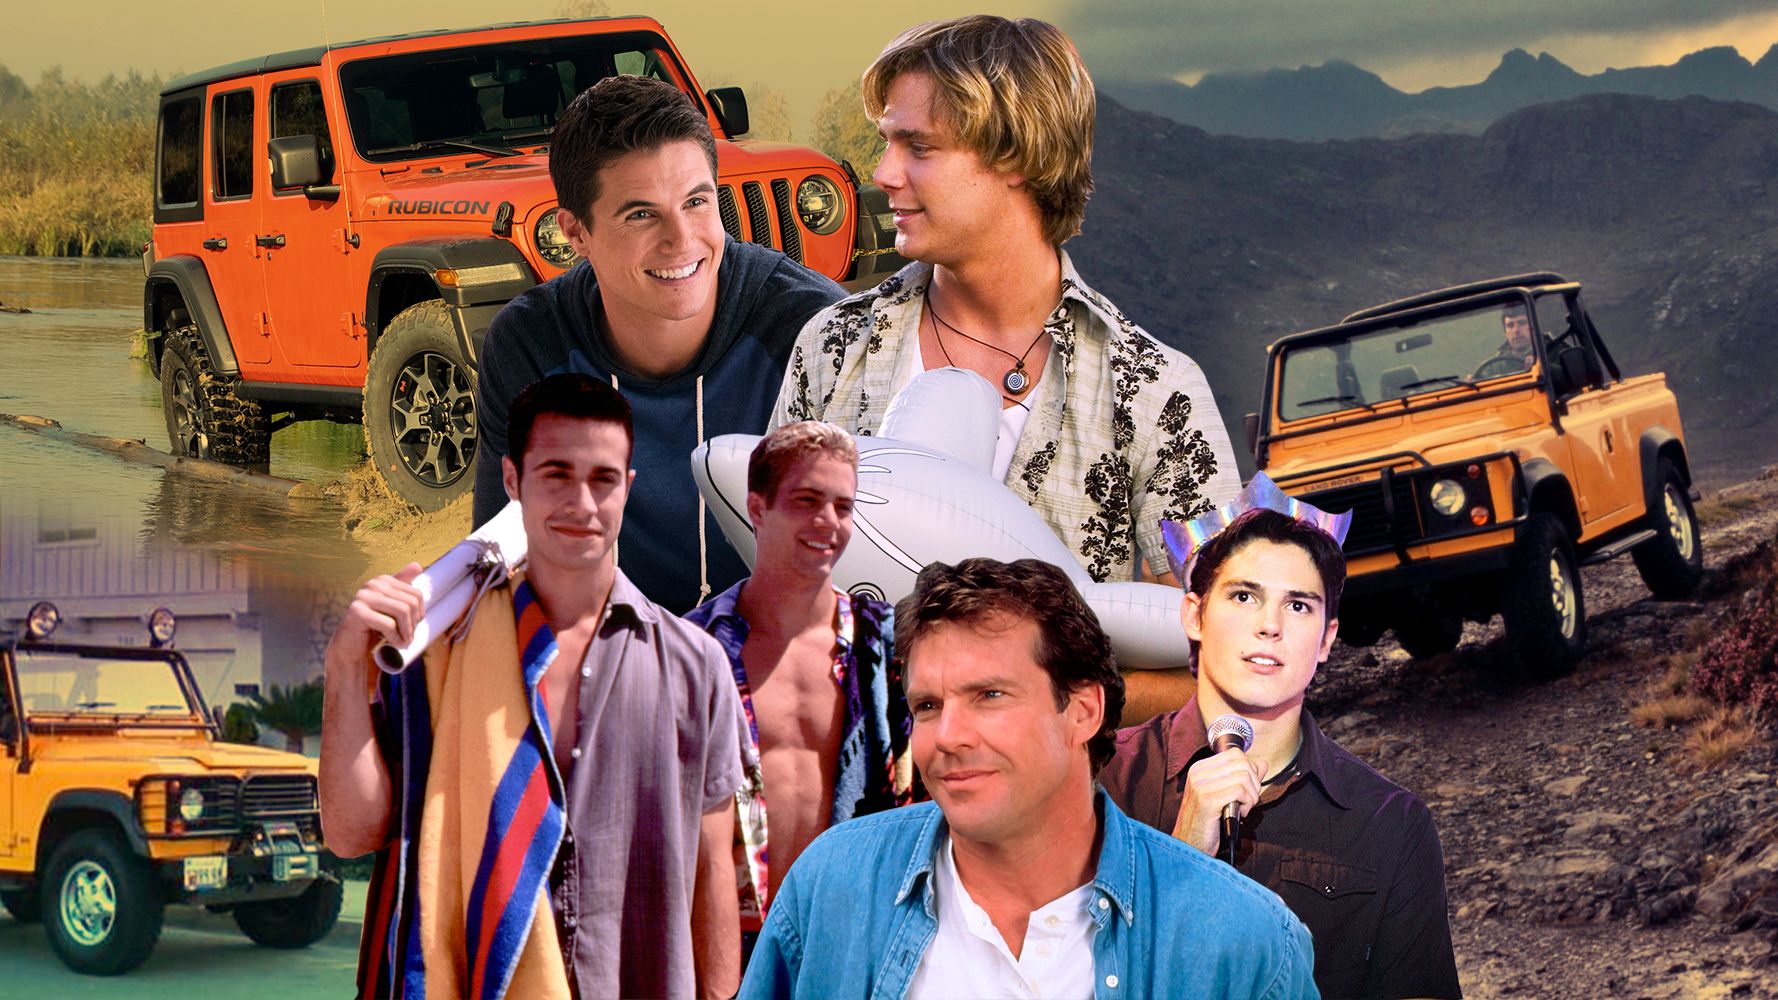 Jeeps and Hot People In Movies Whats Up With That? Marie Claire